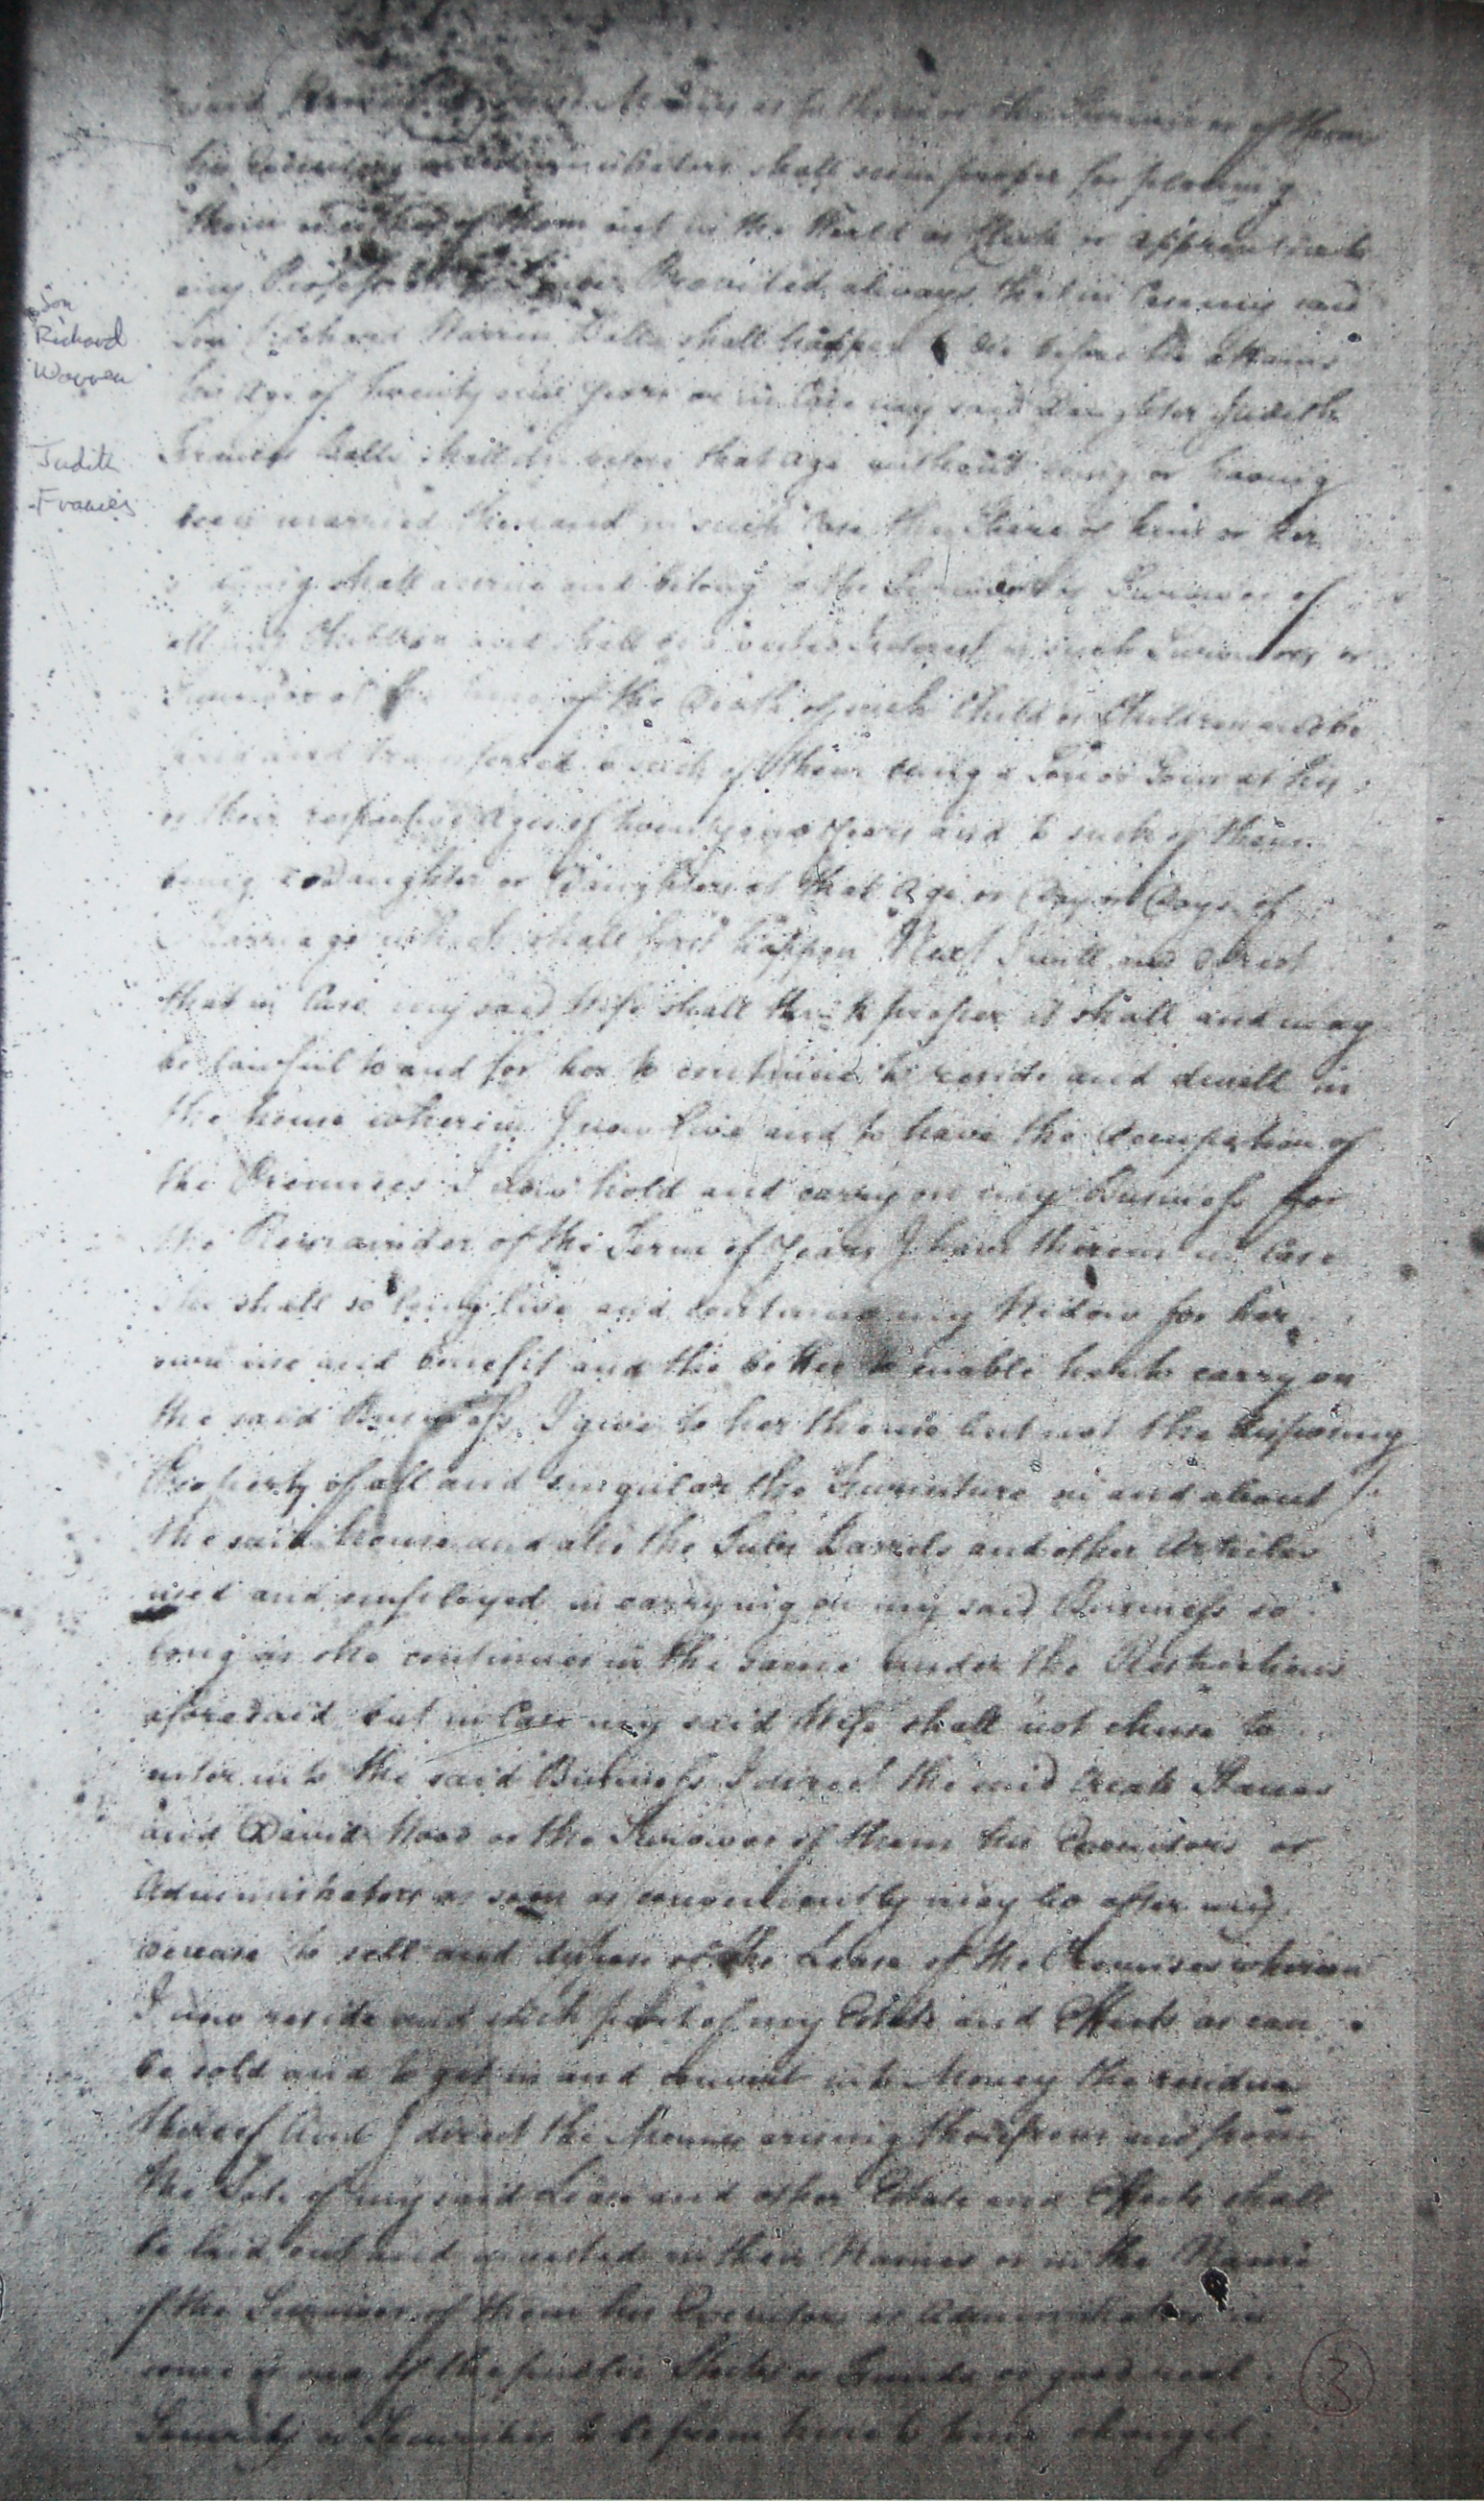 Richard Balls will of 1798, page 3. Mentions son Richard Warren, daughter Judith Frances